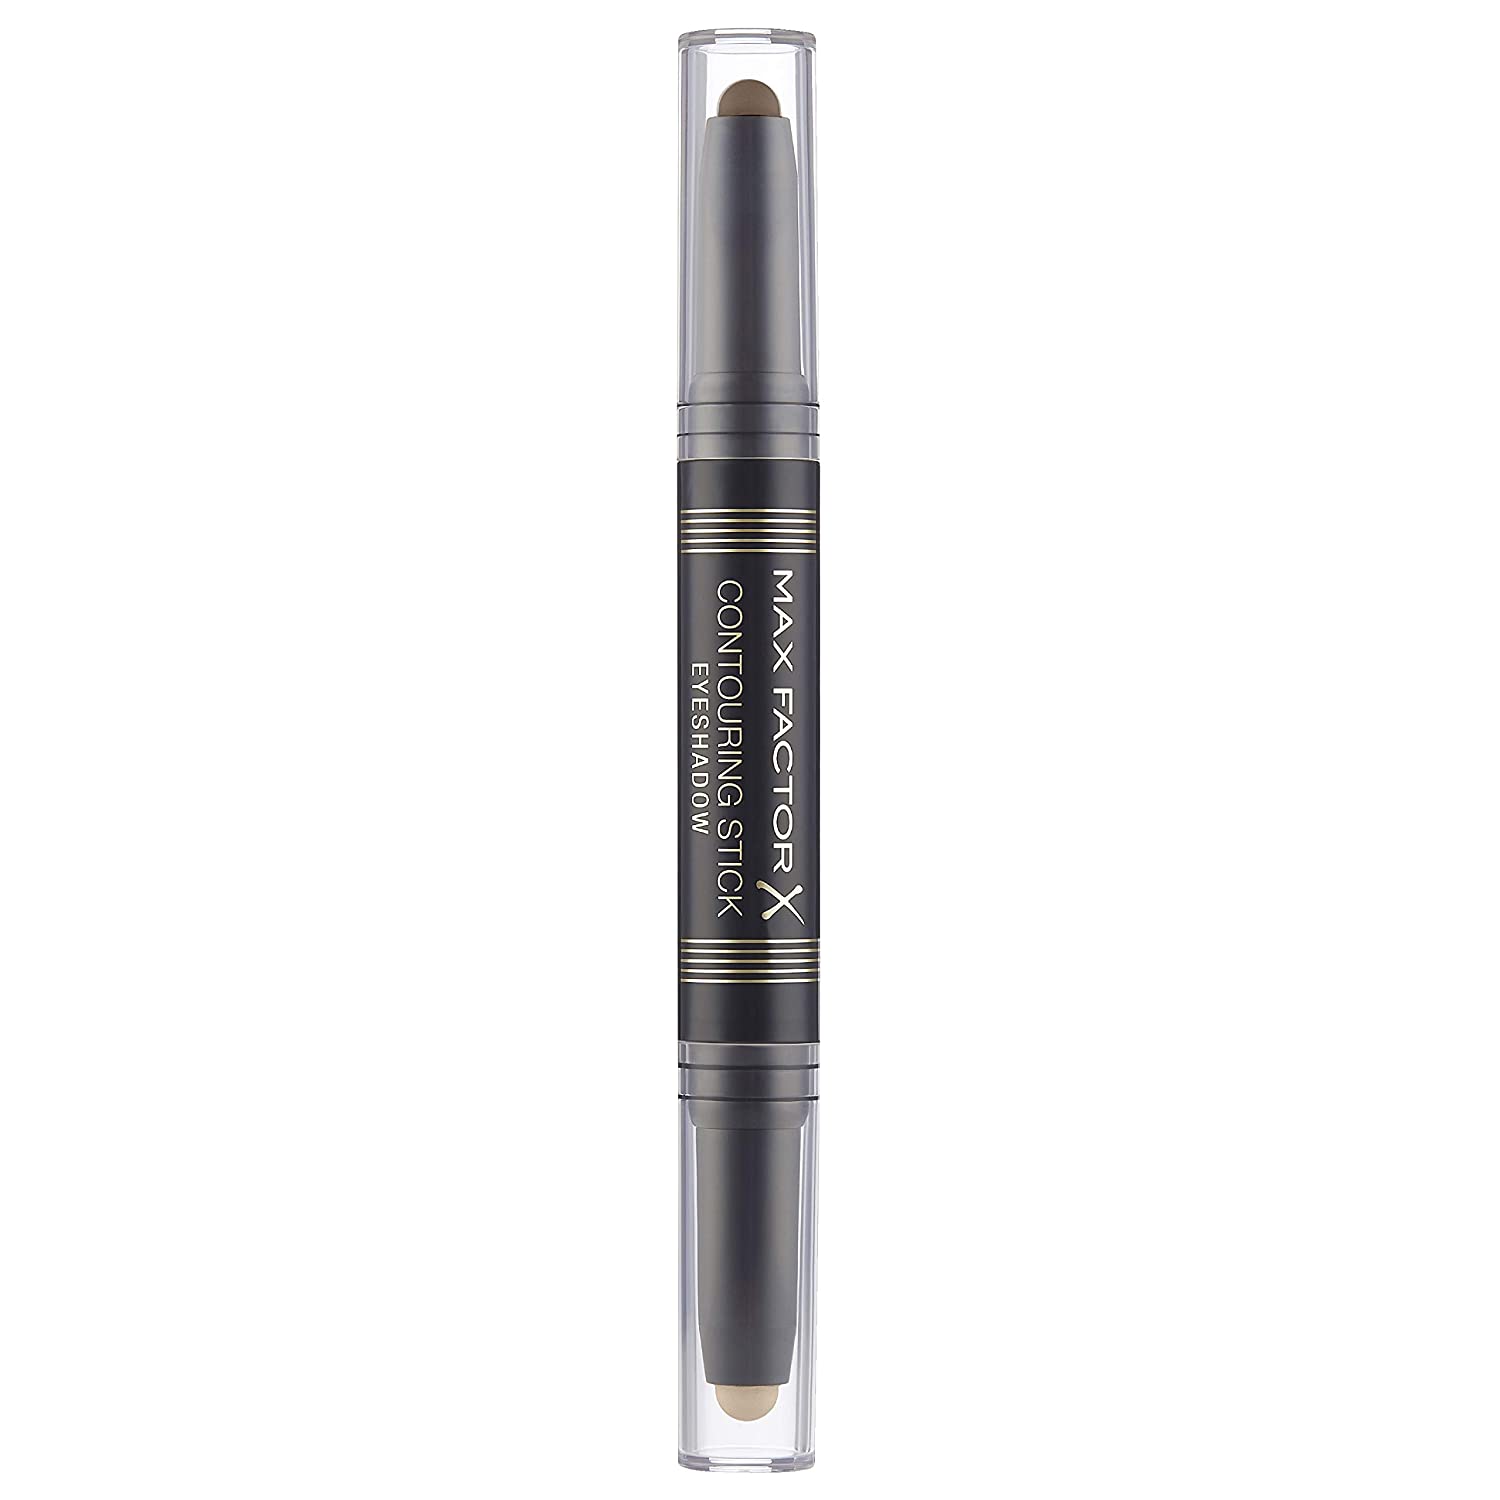 Max Factor Contouring Stick Eyeshadow Warm Taupe & Amber Brown - Eyeshadow Pencil with Two Warm Earth Tones for a Successful Eye Look - With Creamy Texture, and ‎warm